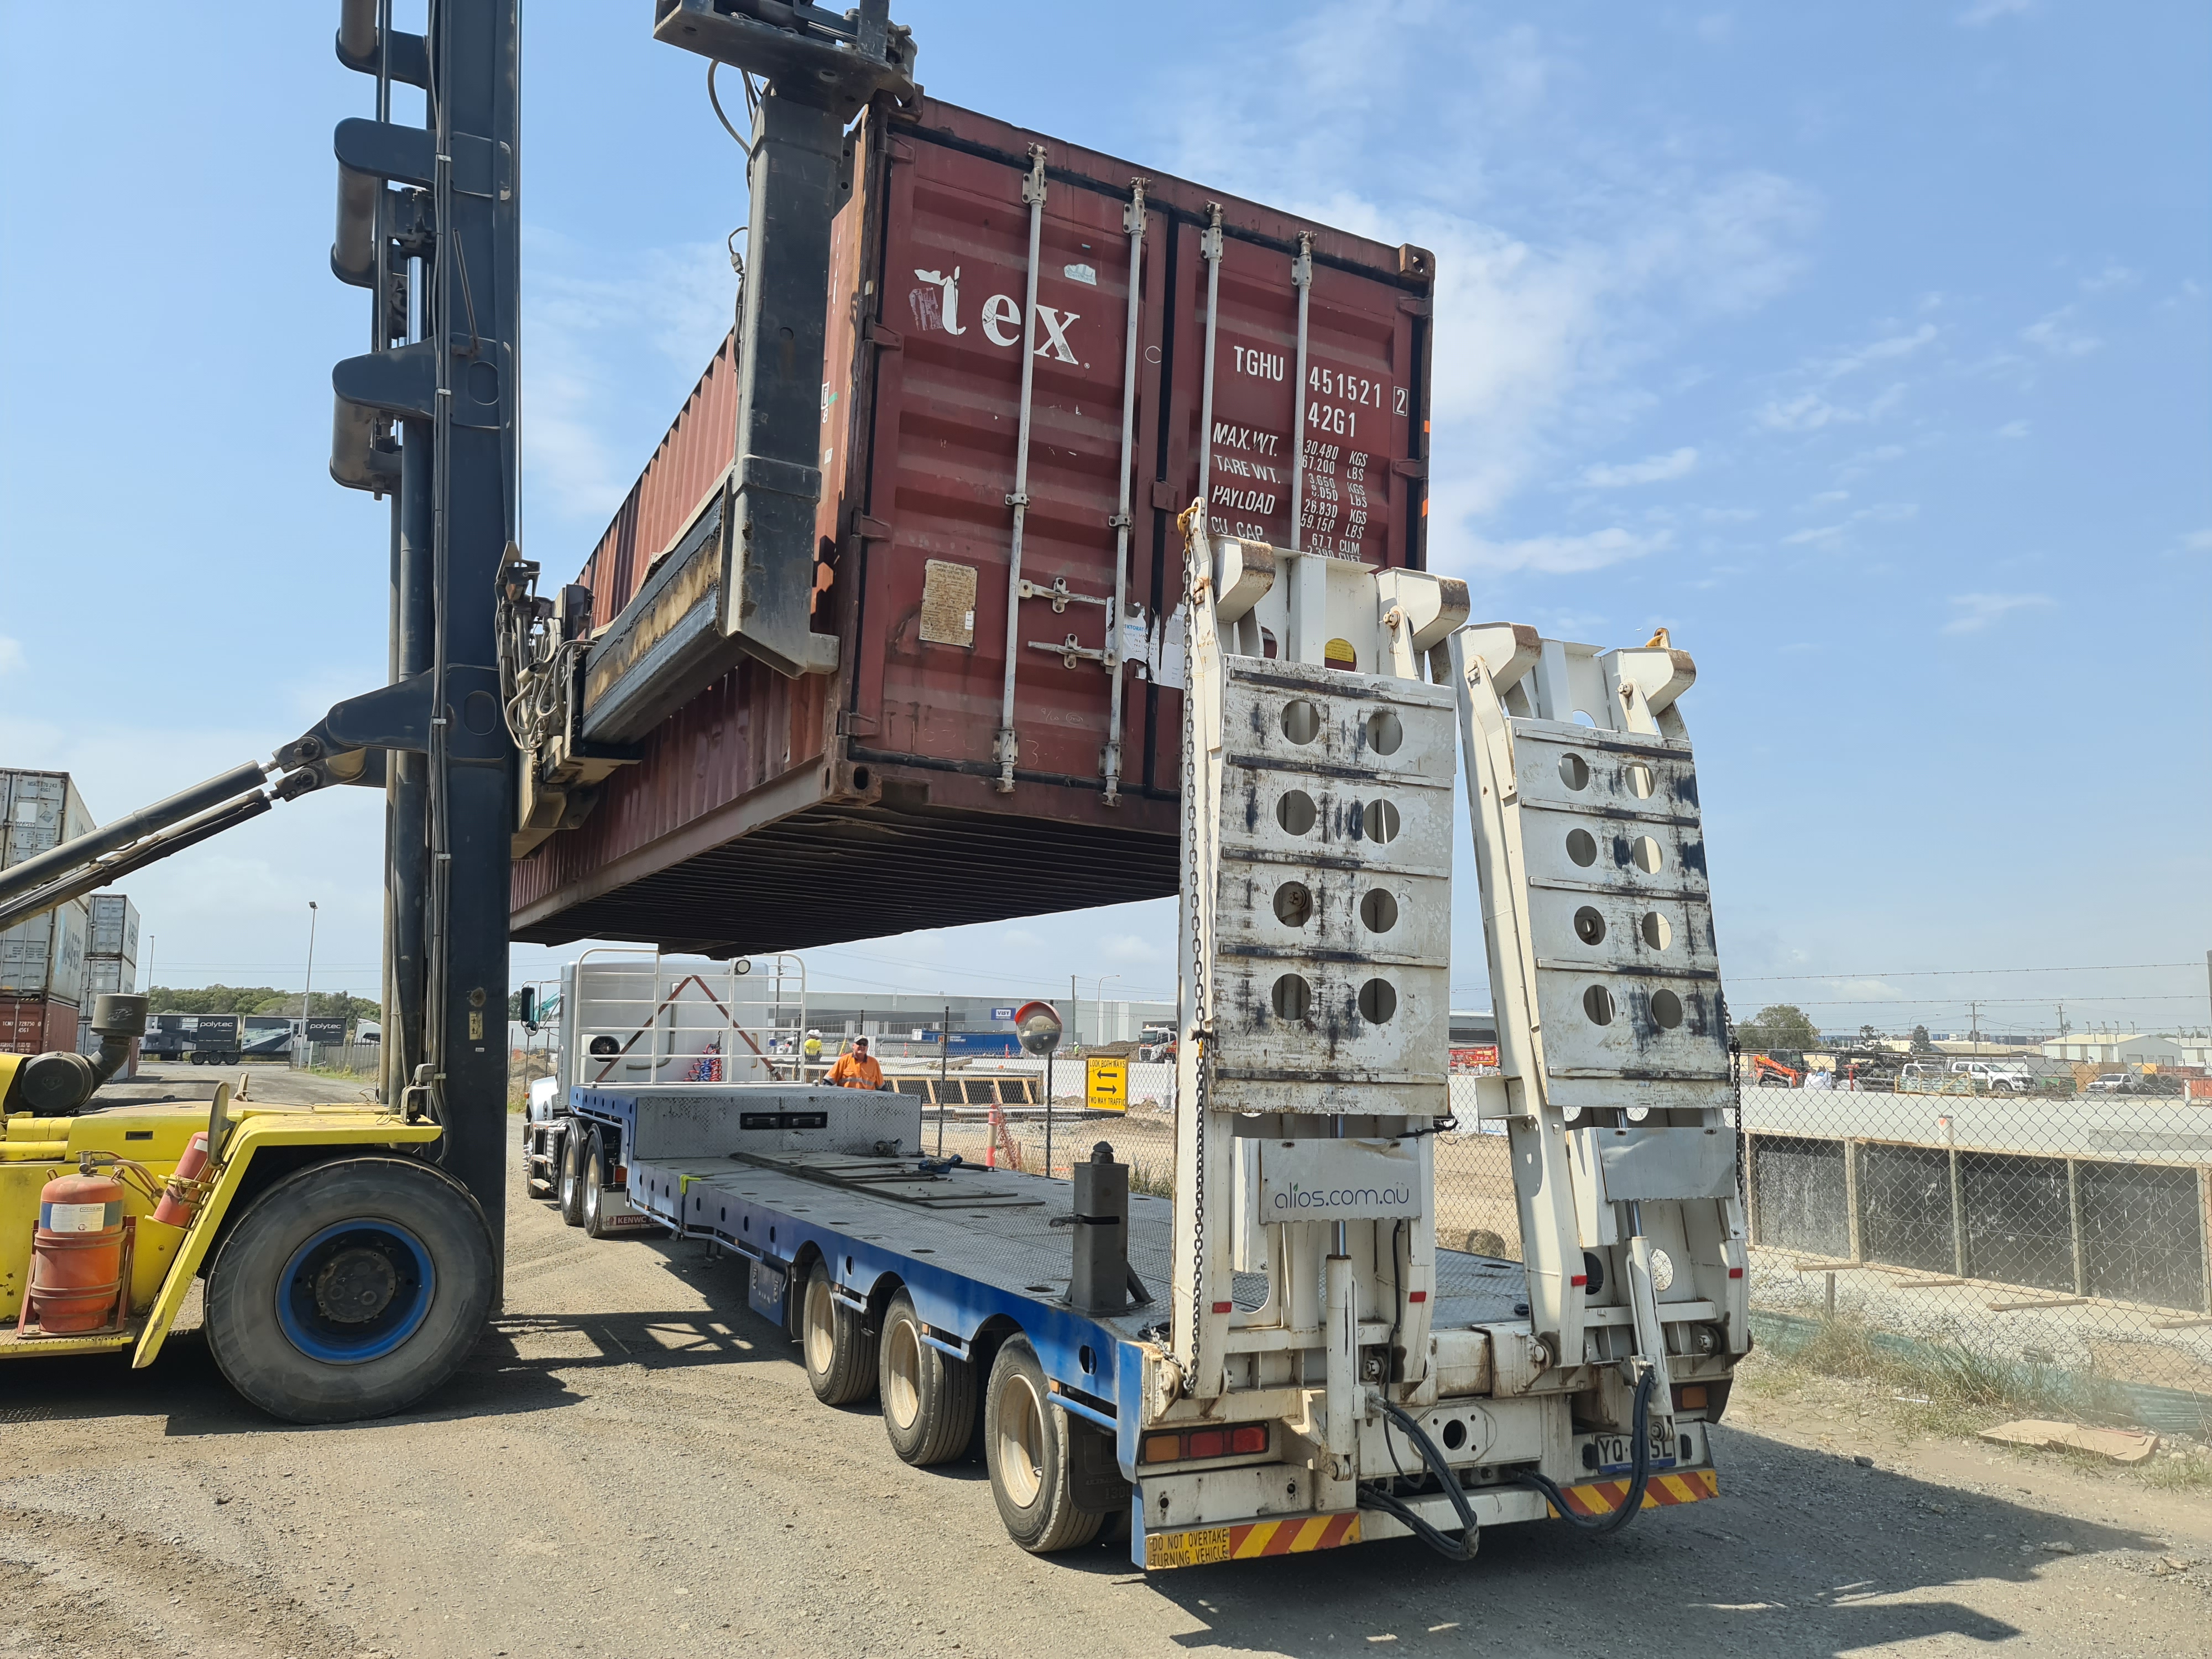 40ft container getting loaded onto a truck